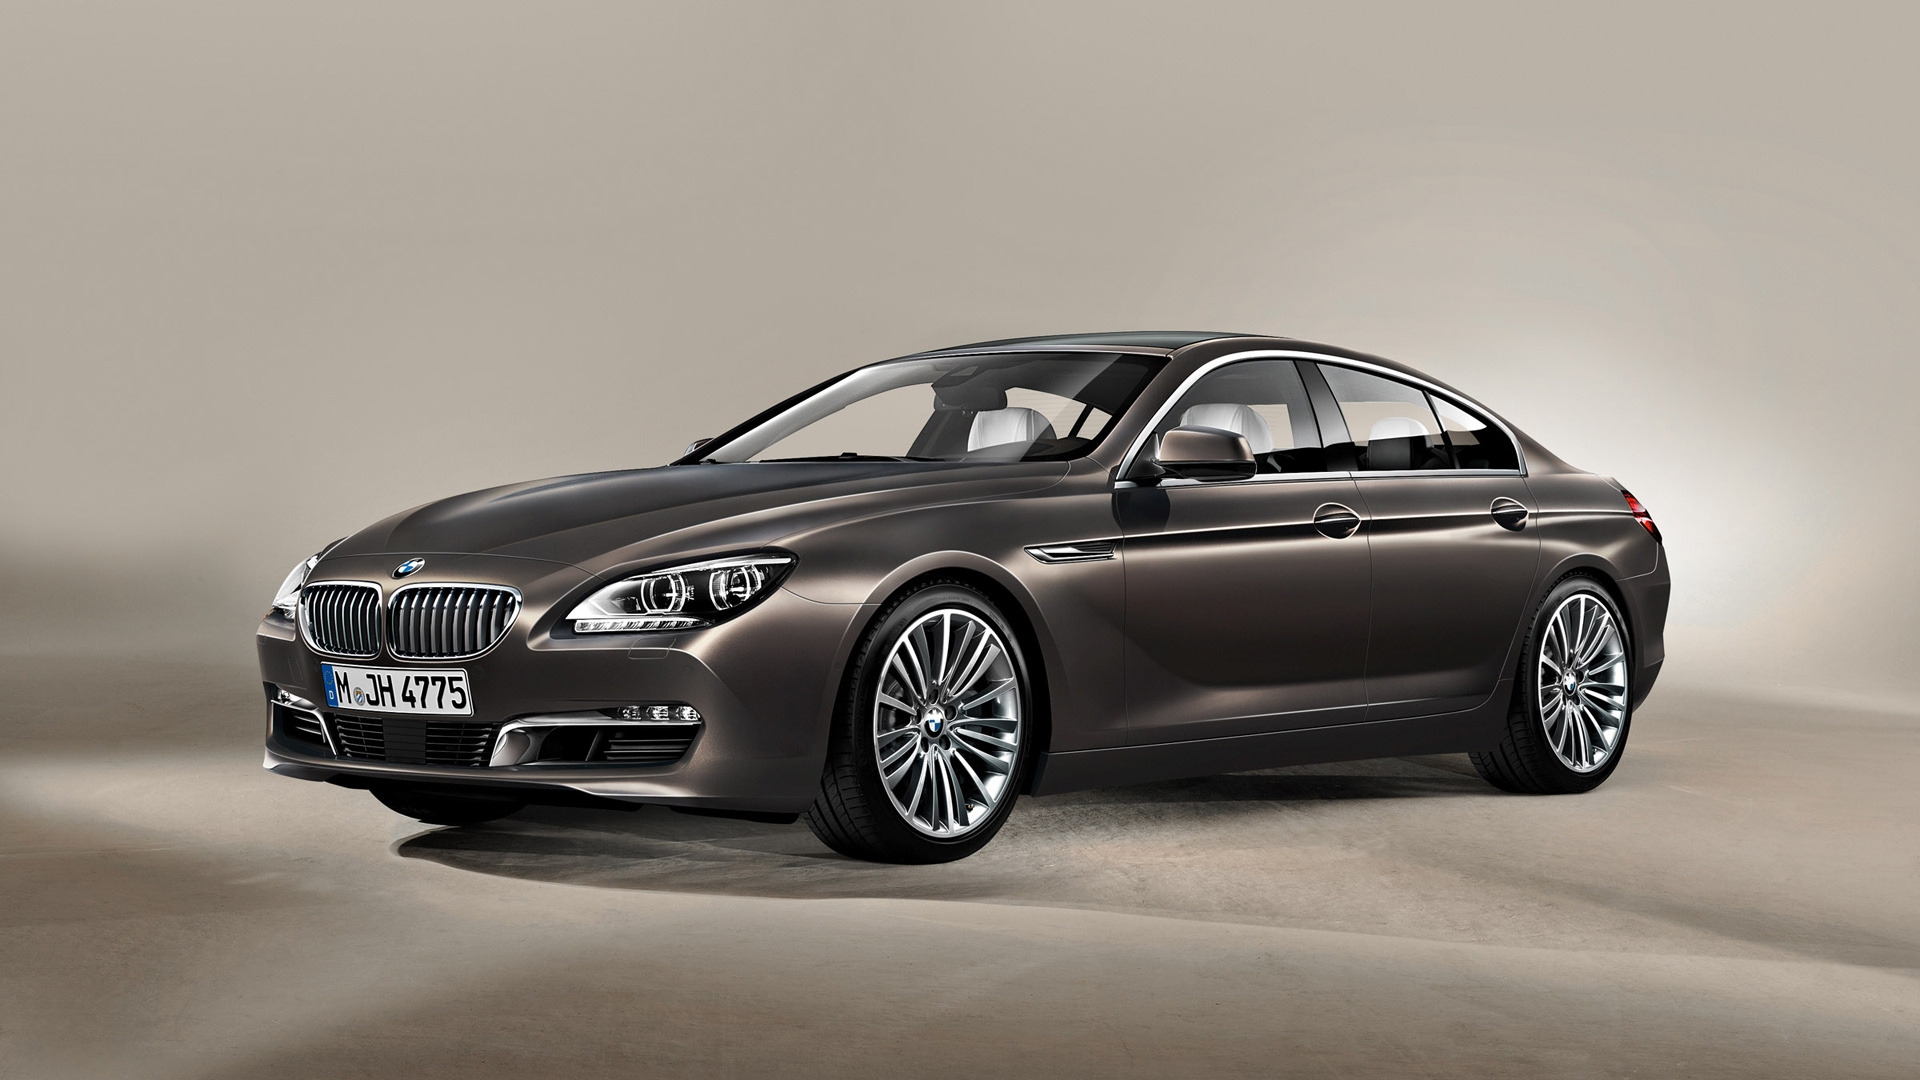 2013 BMW 6 Series Gran Coupe Studio for 1920 x 1080 HDTV 1080p resolution